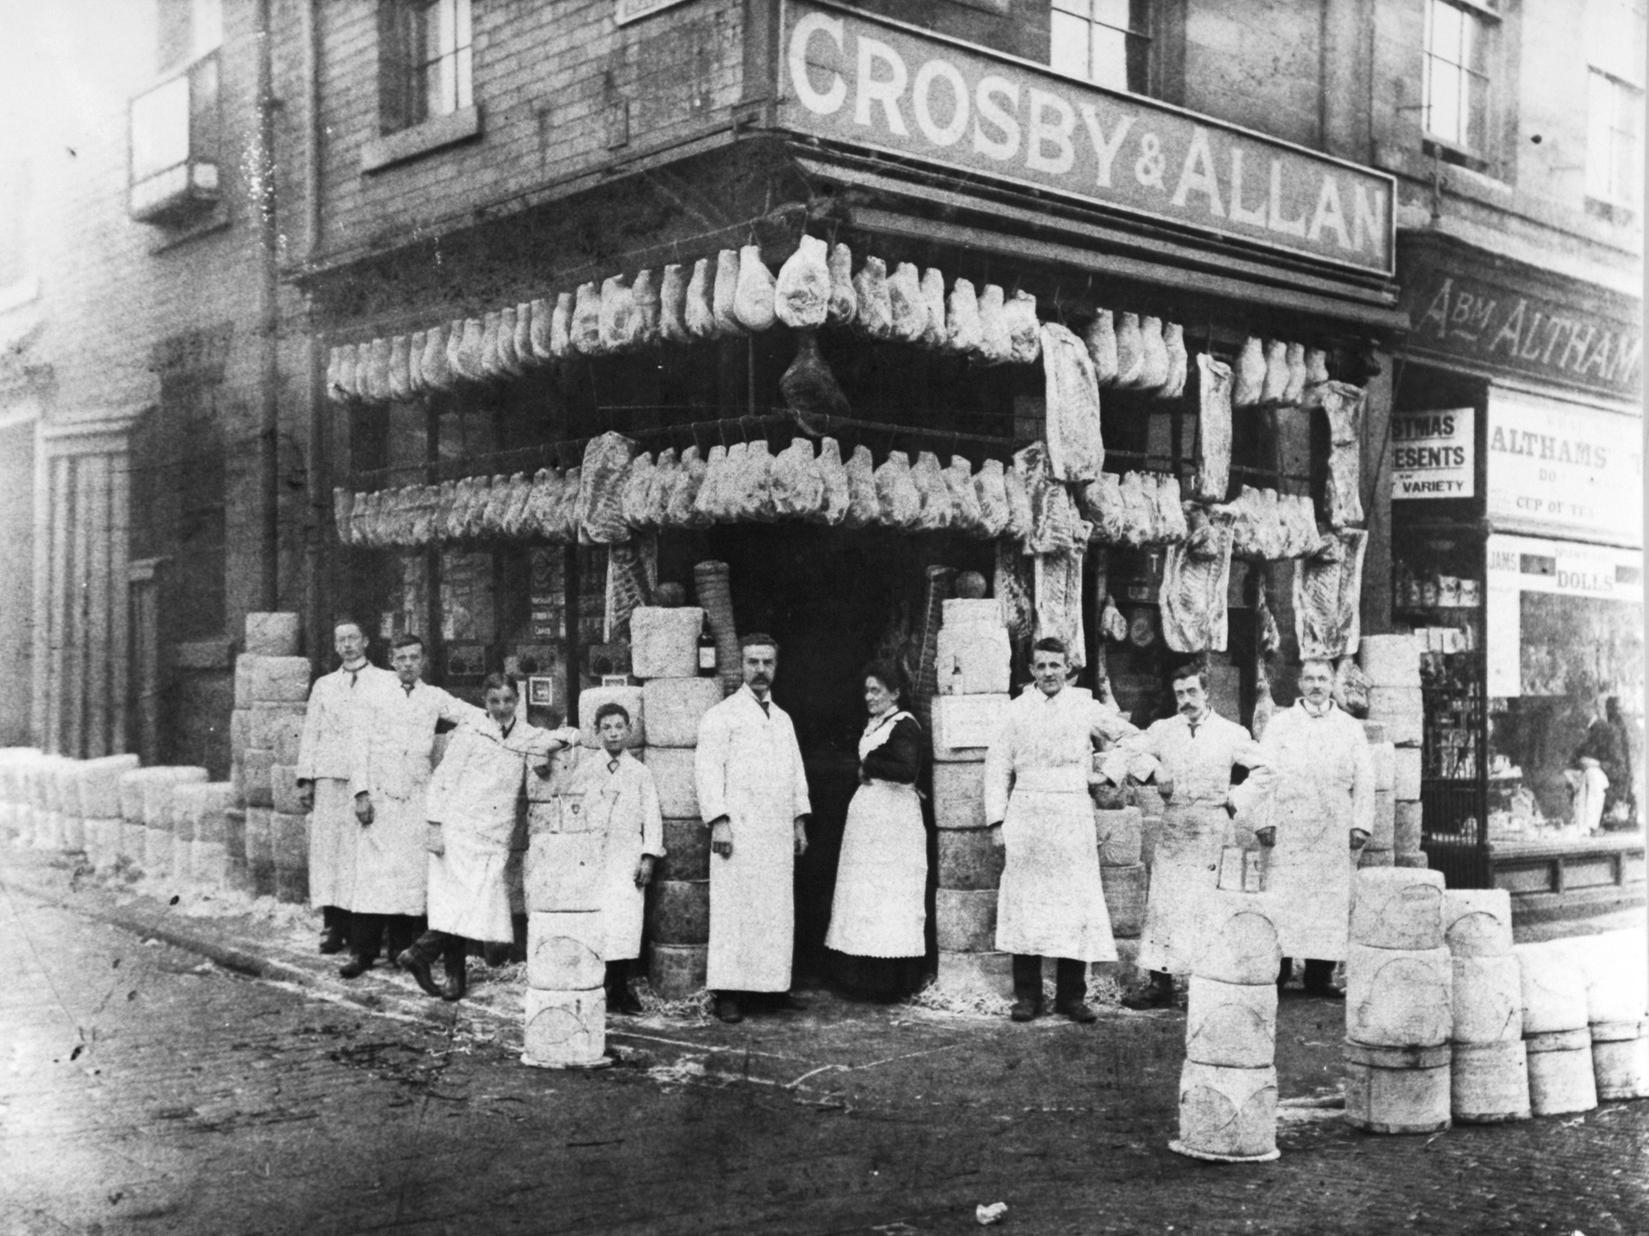 Crosby and Allan butchers shop on Market Street.